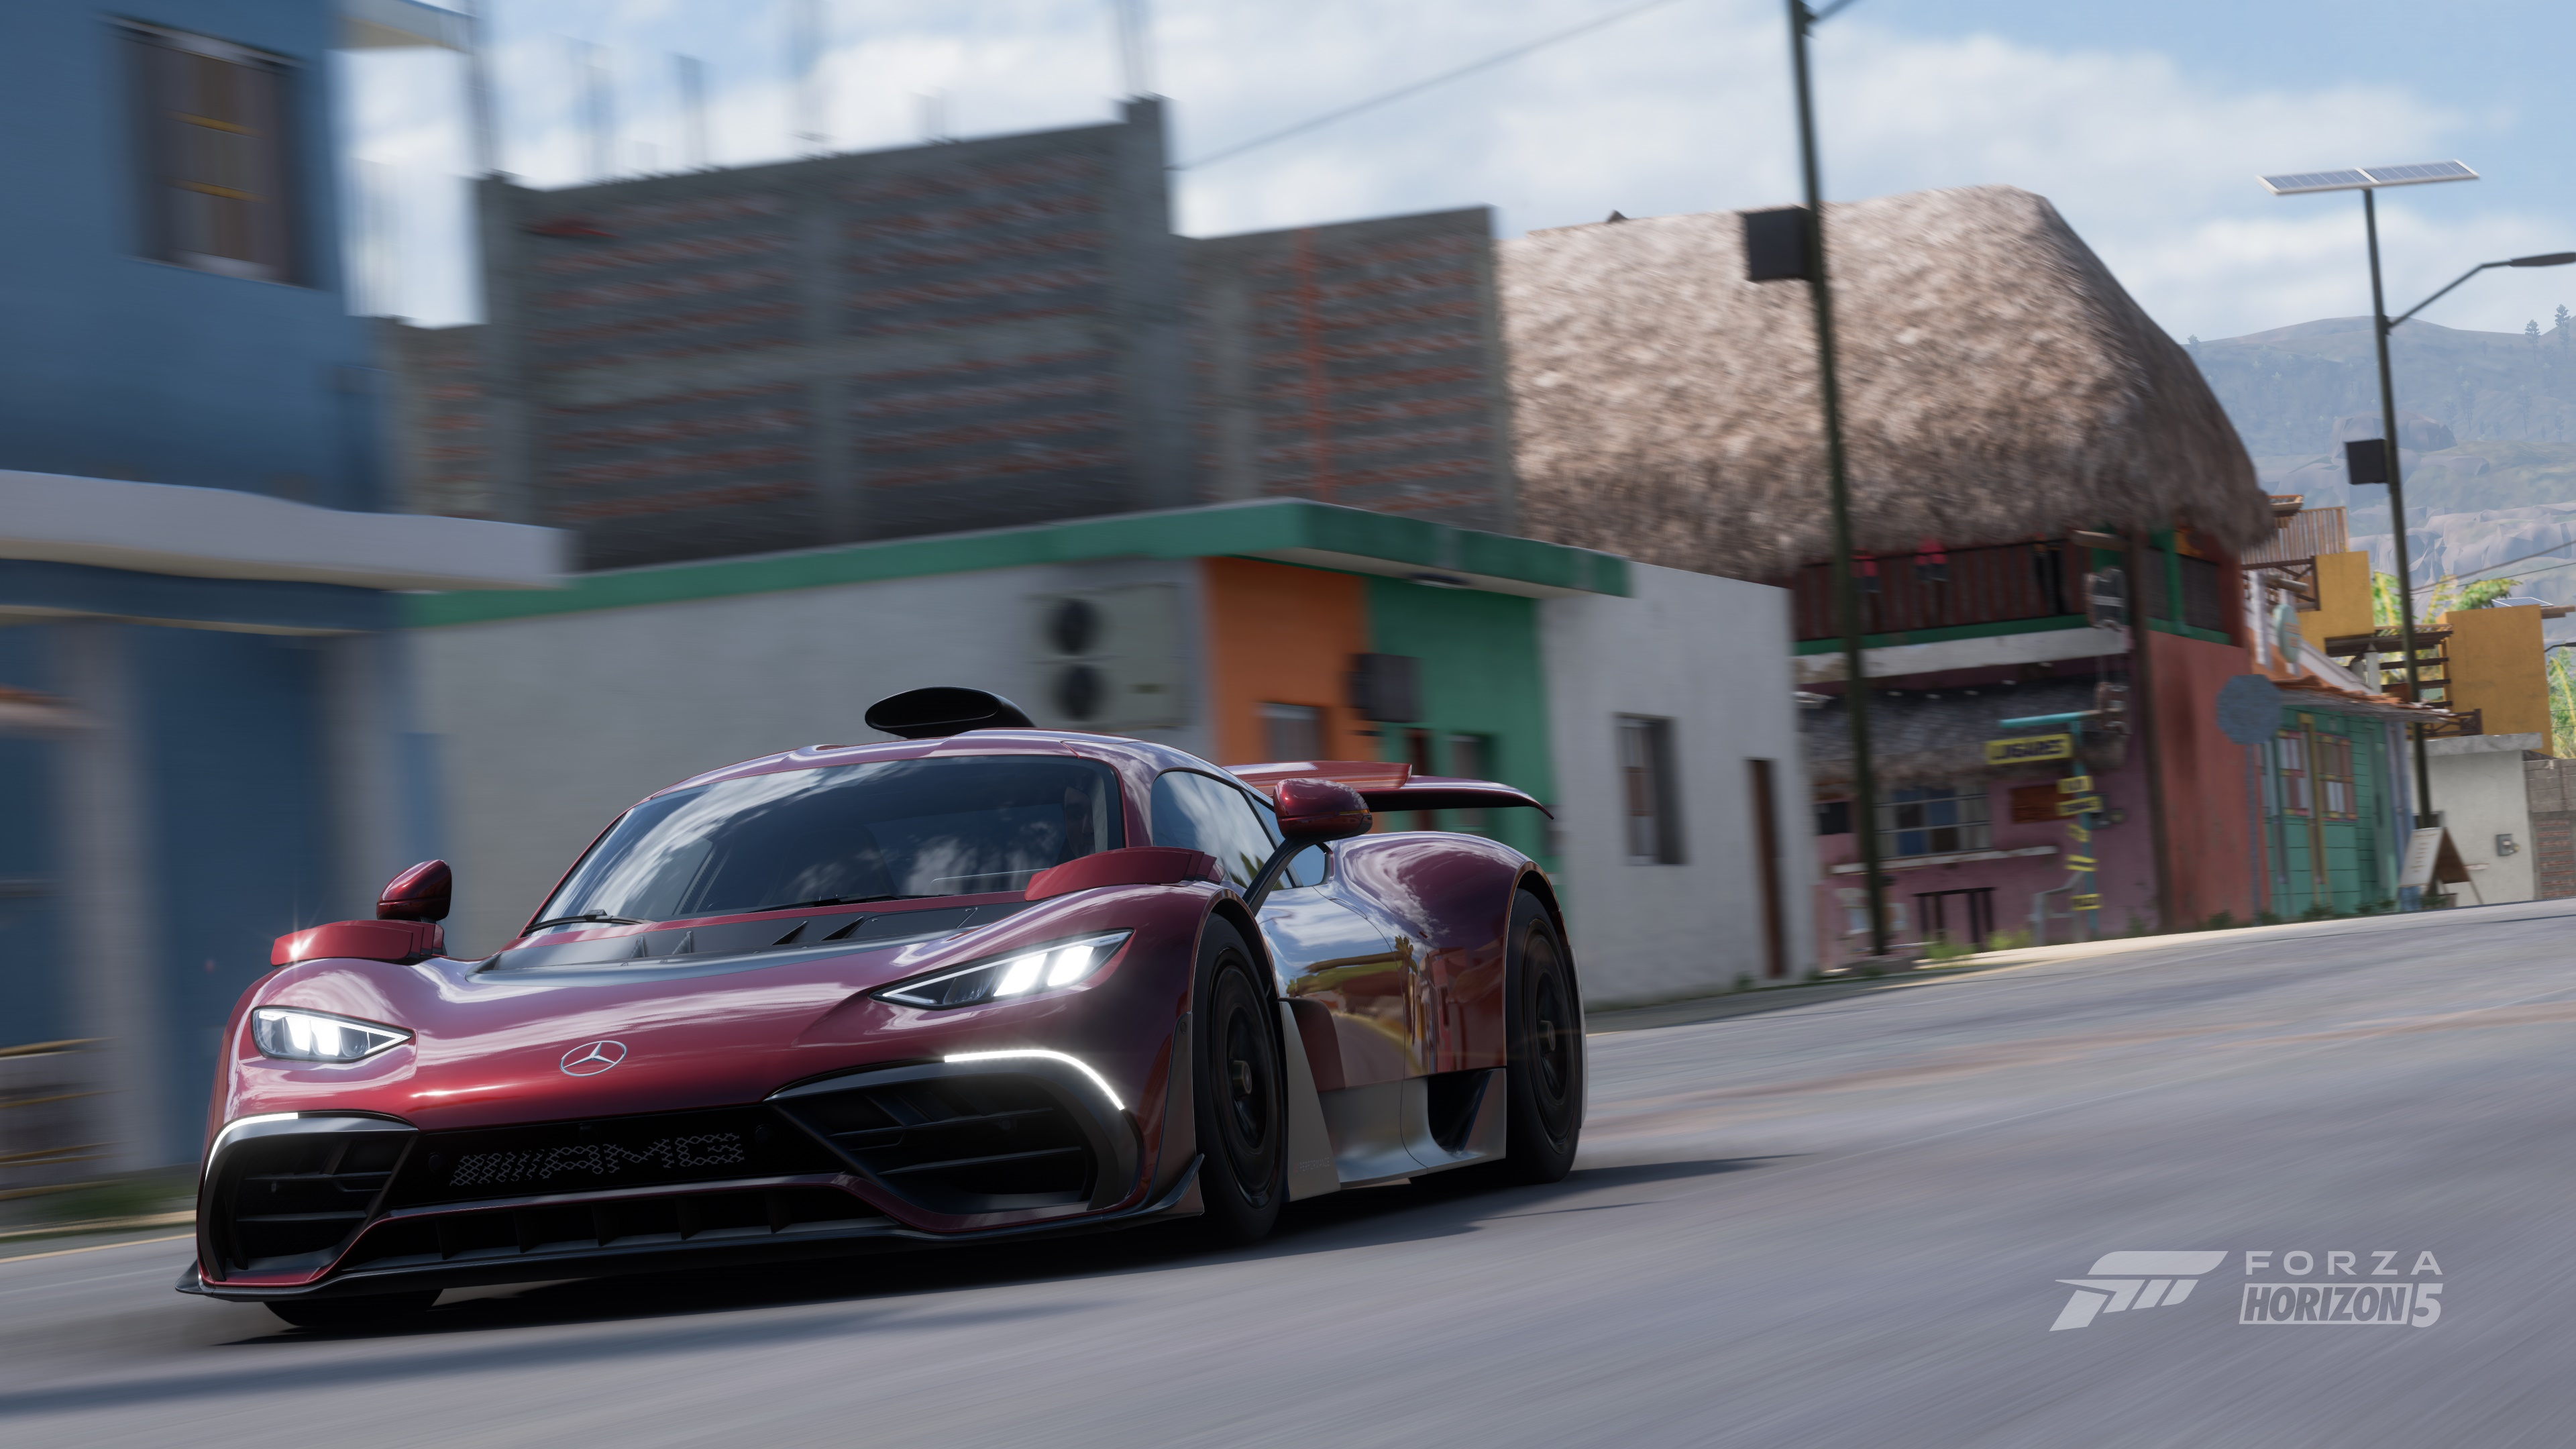 Forza Horizon 5 Coming in November With Mexico Setting